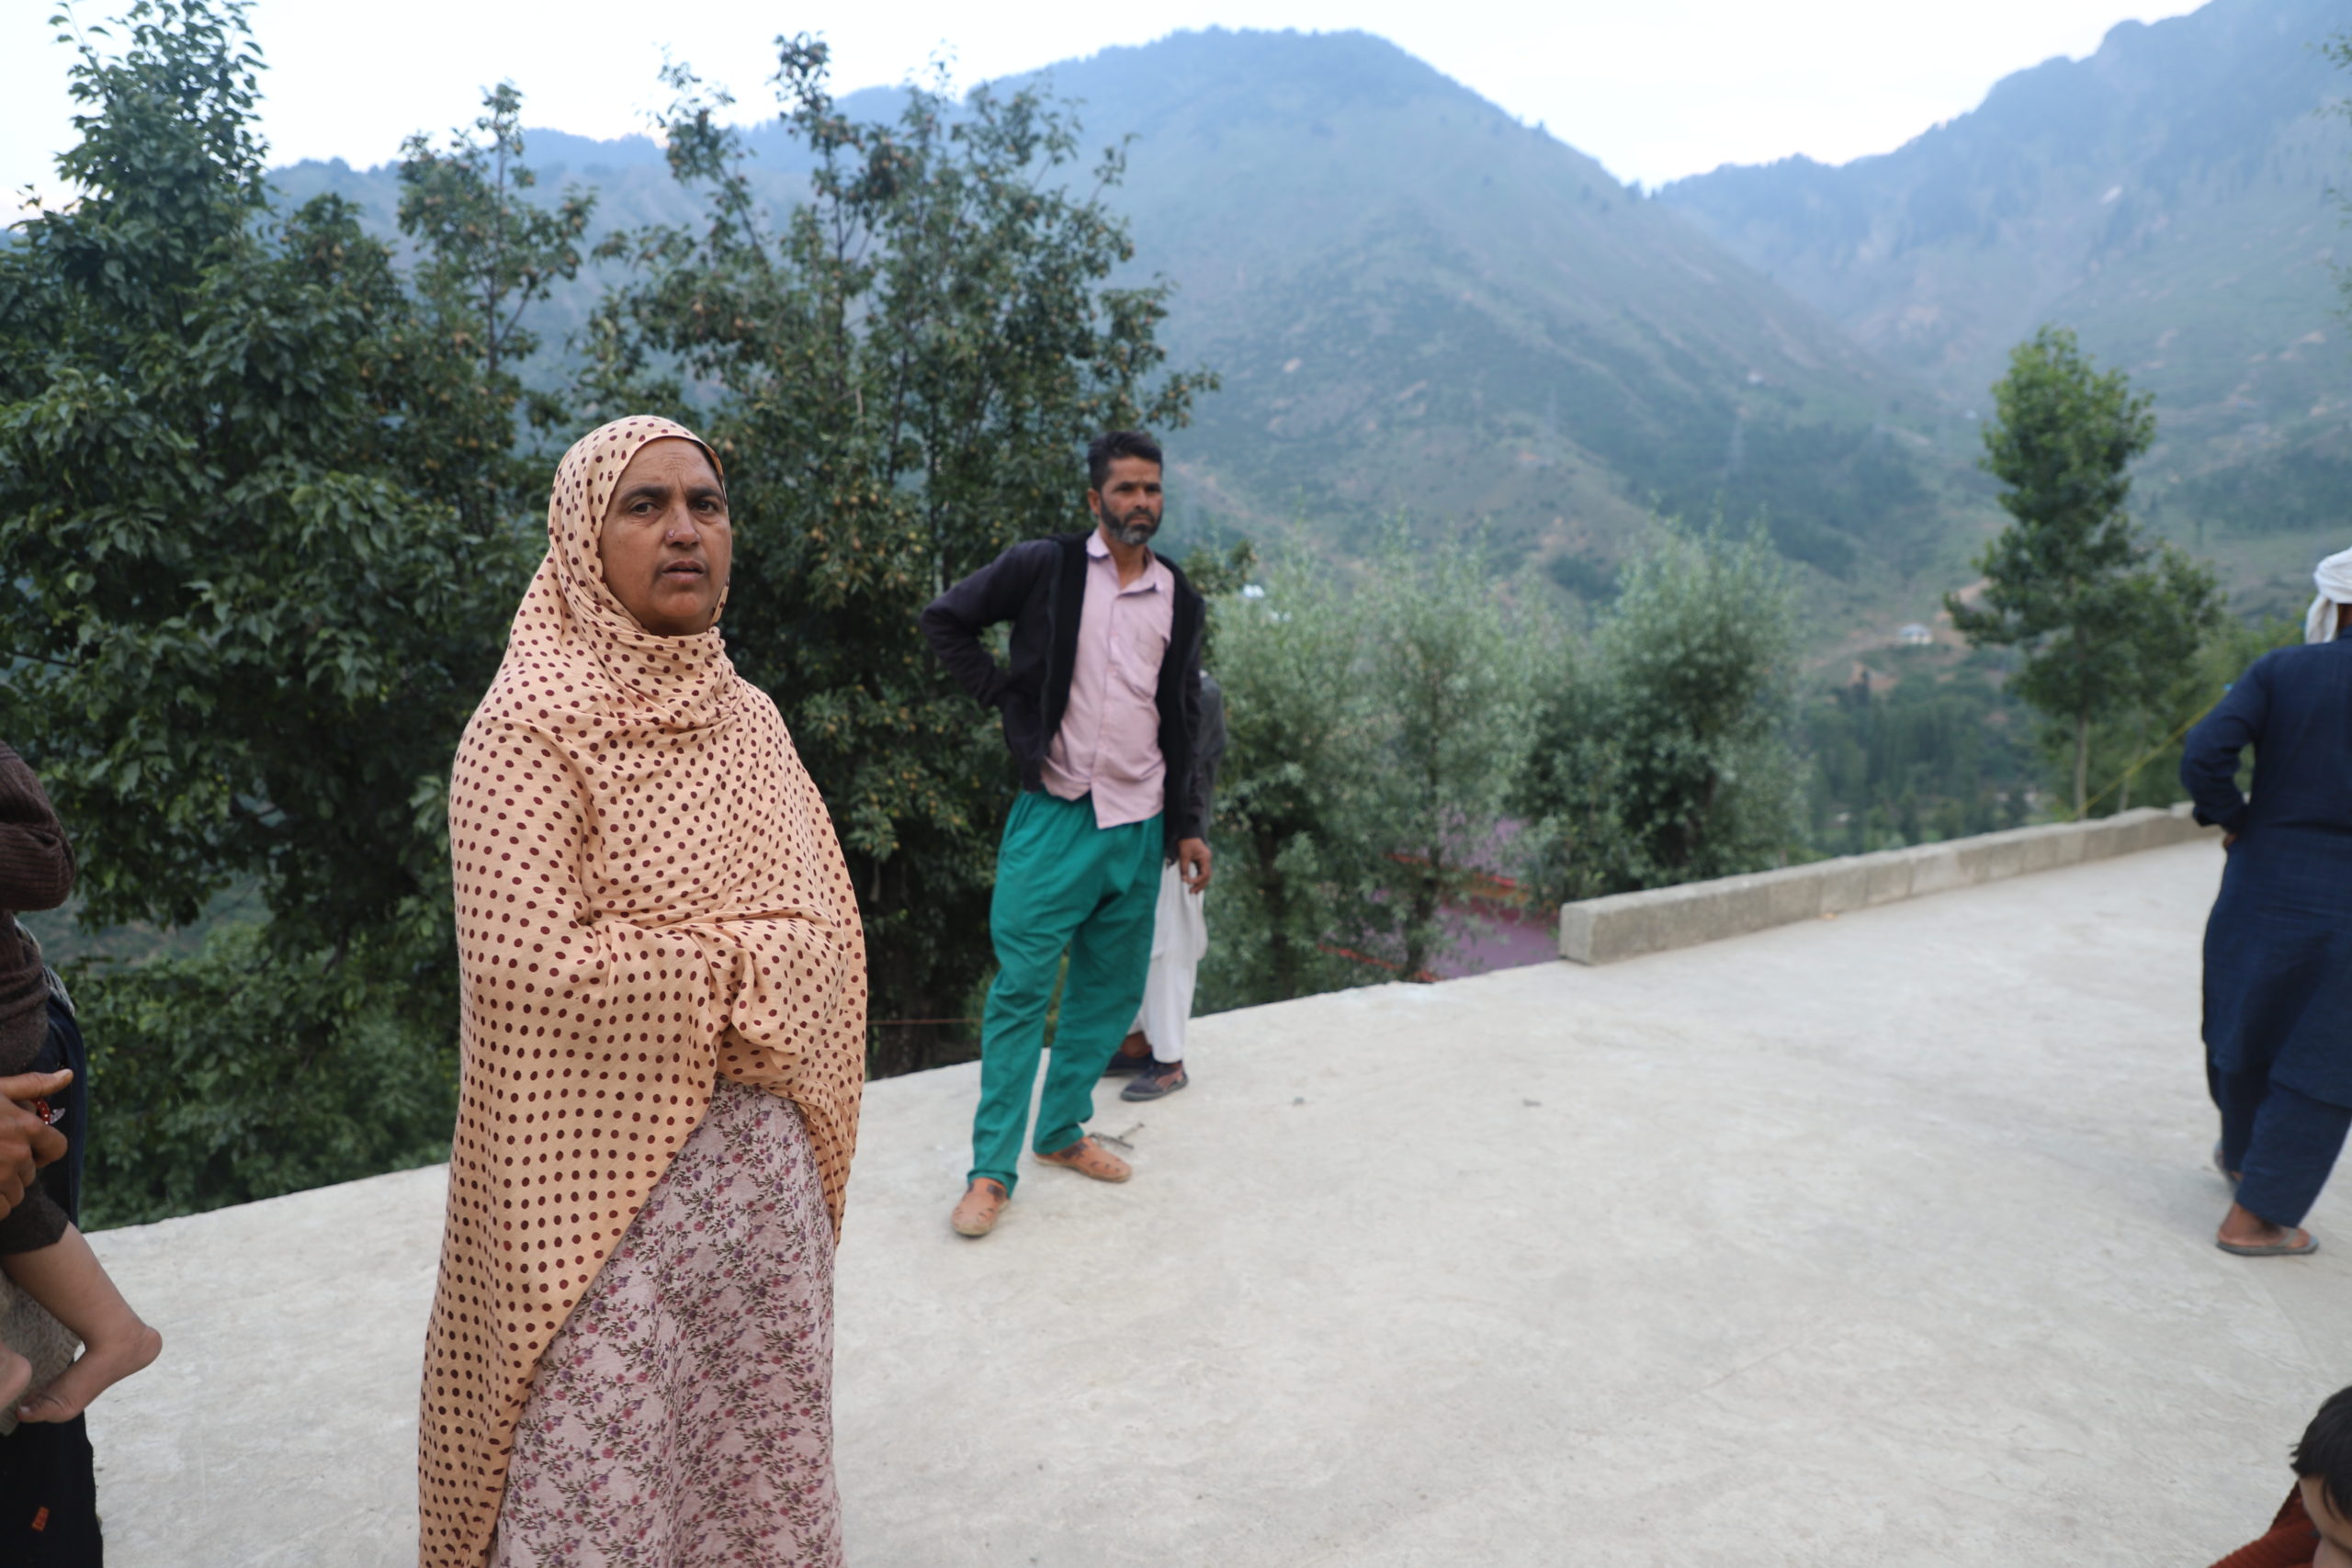 people on a paved road in hilly area